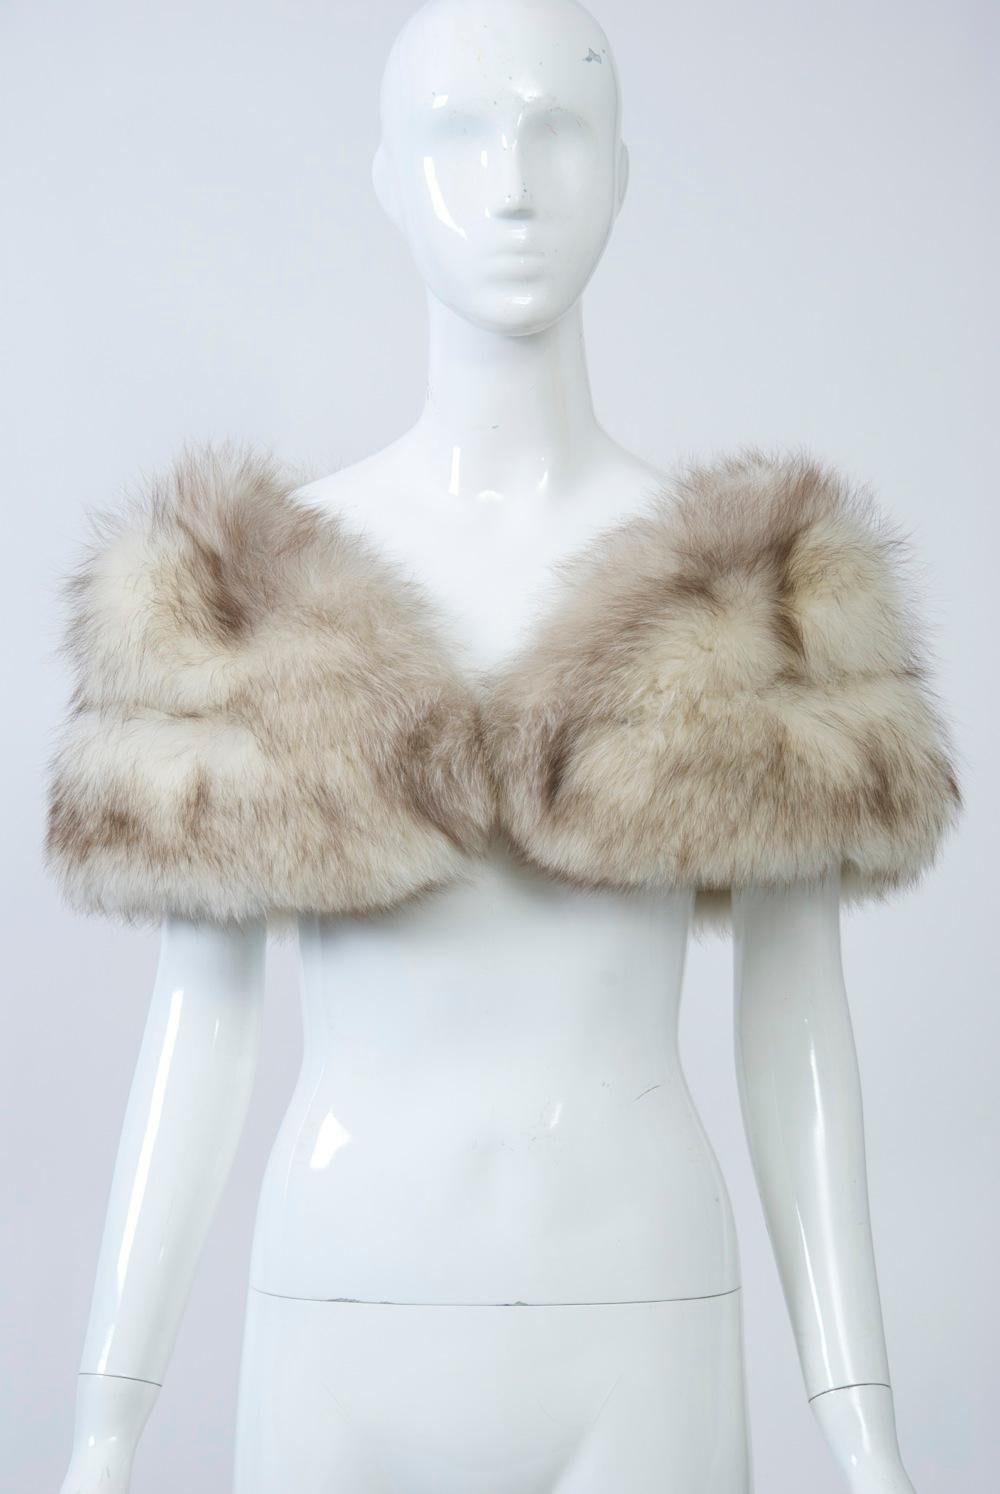 Double-skin fox stole is the perfect wrap for evening, weddings, etc. Beige satin lining with hand compartments. Fur hooks allow for adjustability. A great and indispensable accessory.